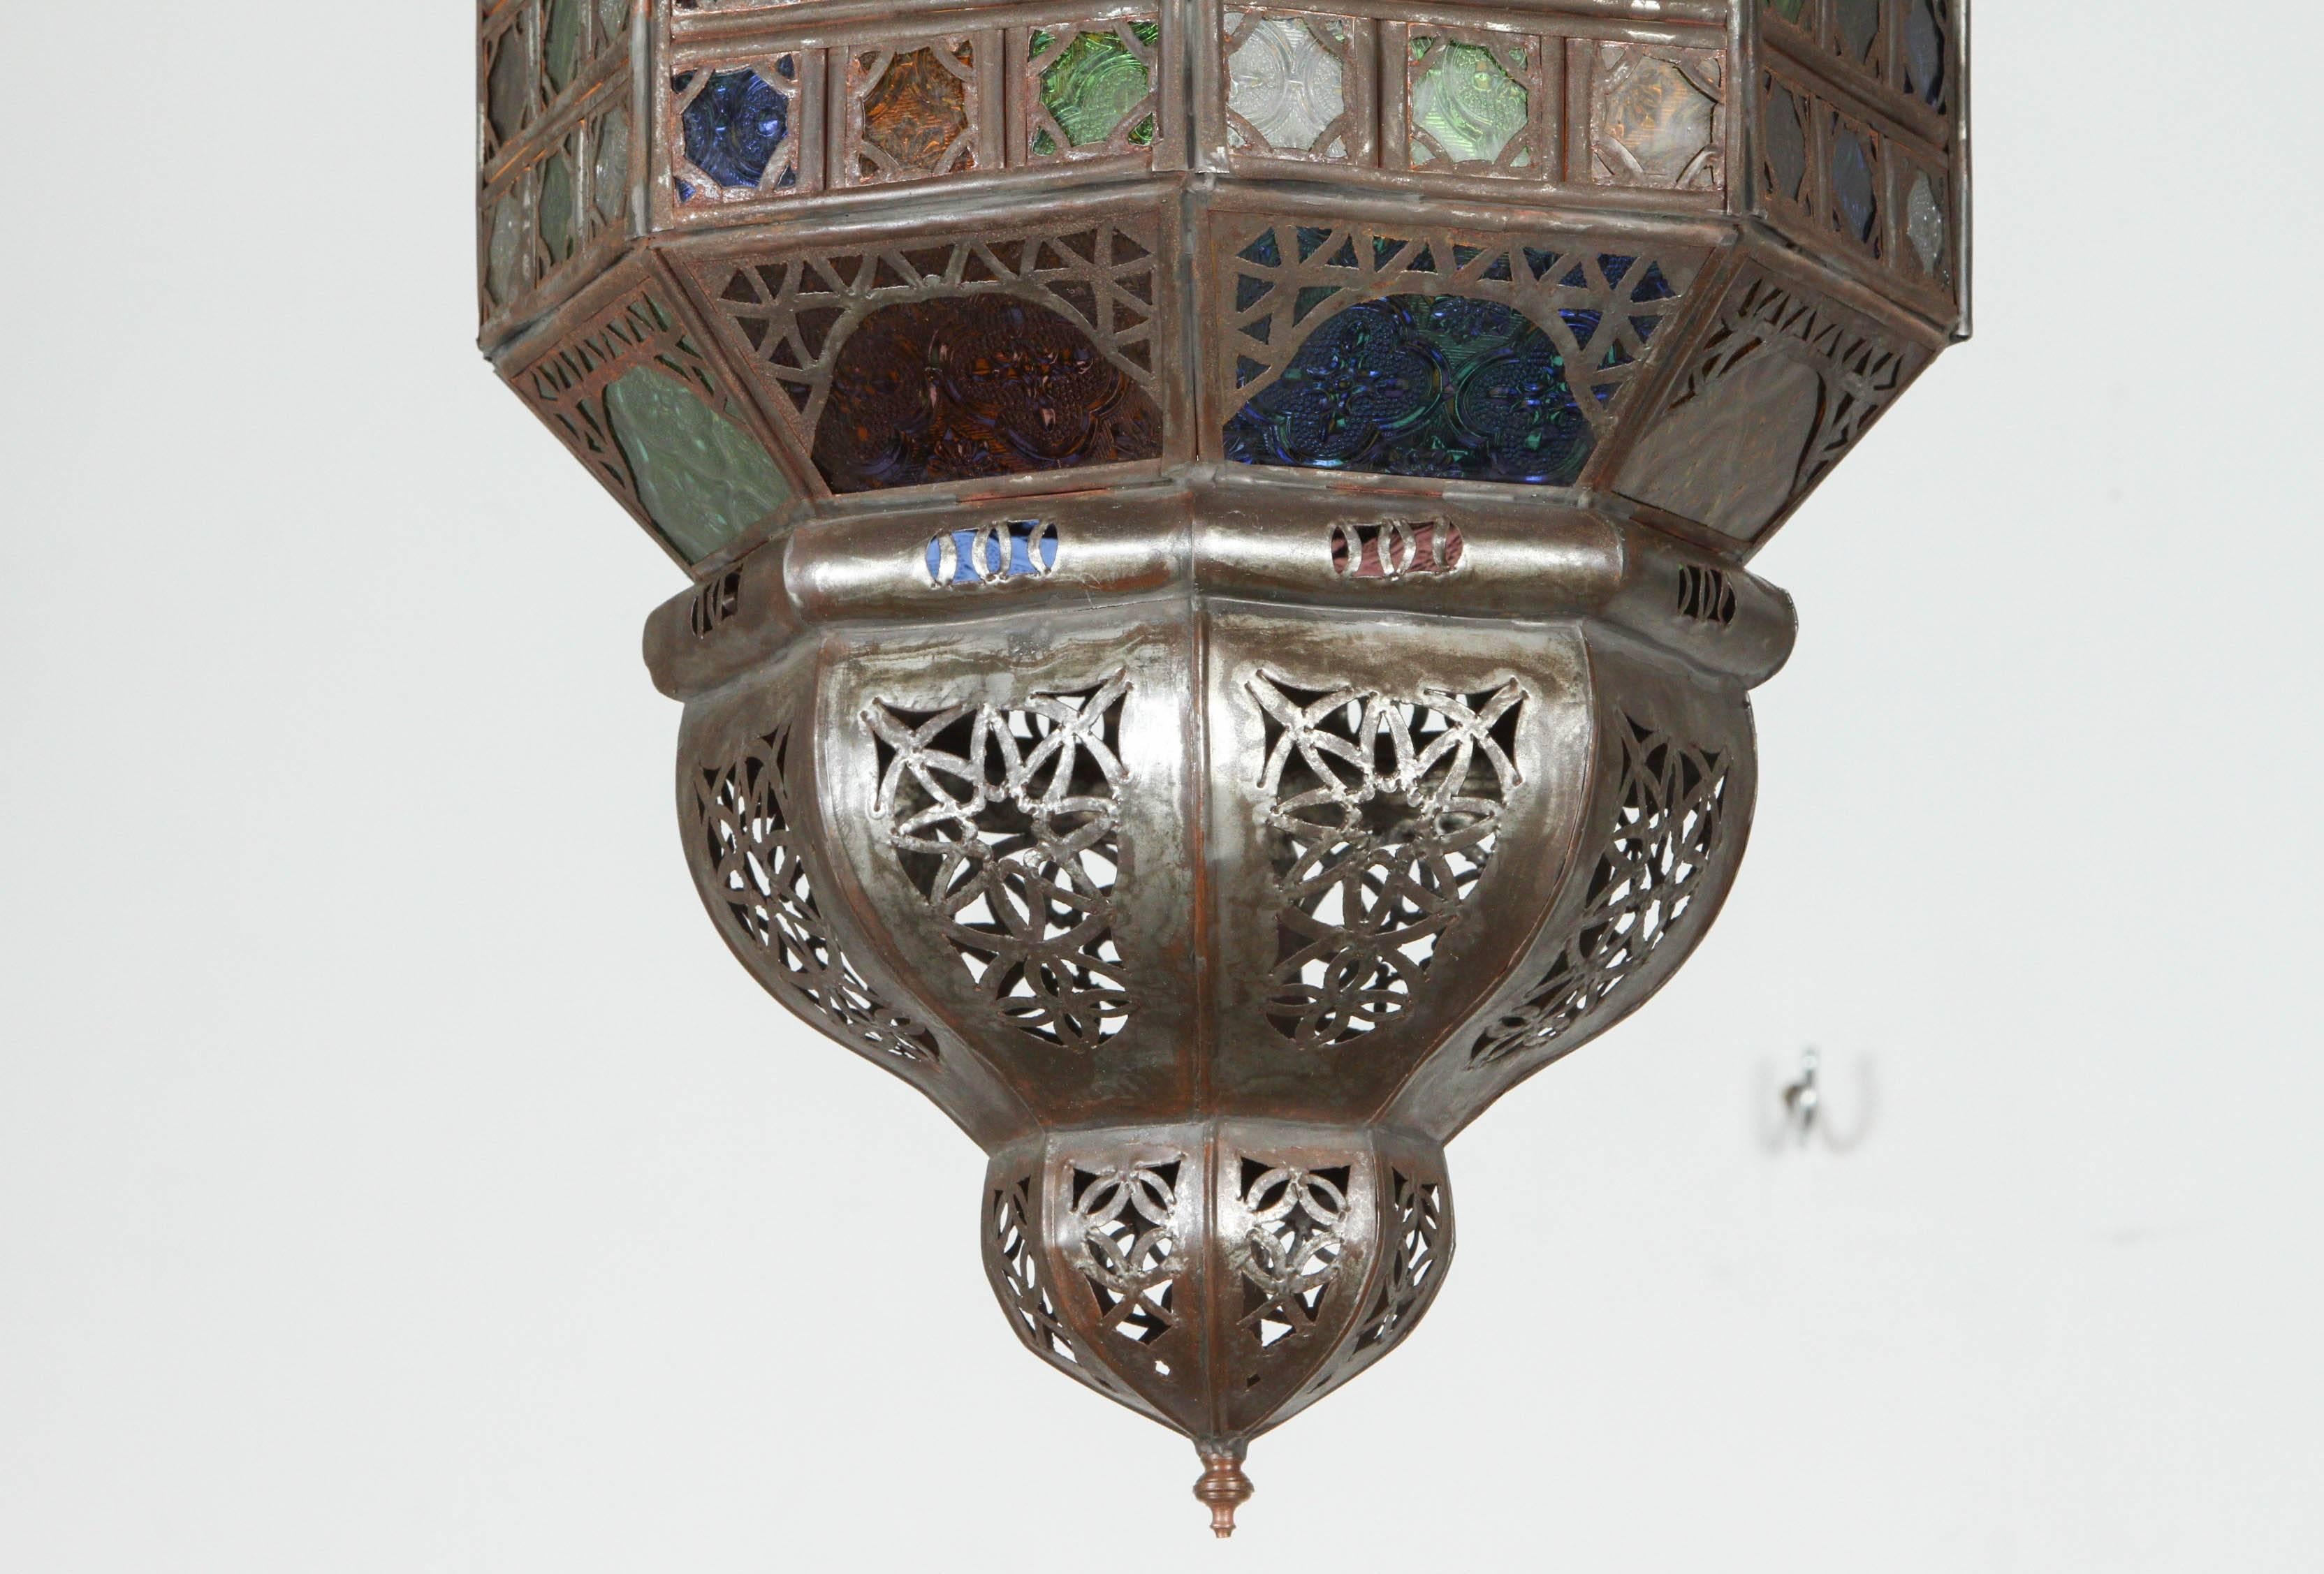 
Handcrafted vintage Moroccan lantern with glass.
Stylish handcrafted Moroccan pendant with multi-color molded stained glass and metal with an antique bronze finish.
Moroccan light fixture with dozen of small cut-glass with Moorish filigree metal